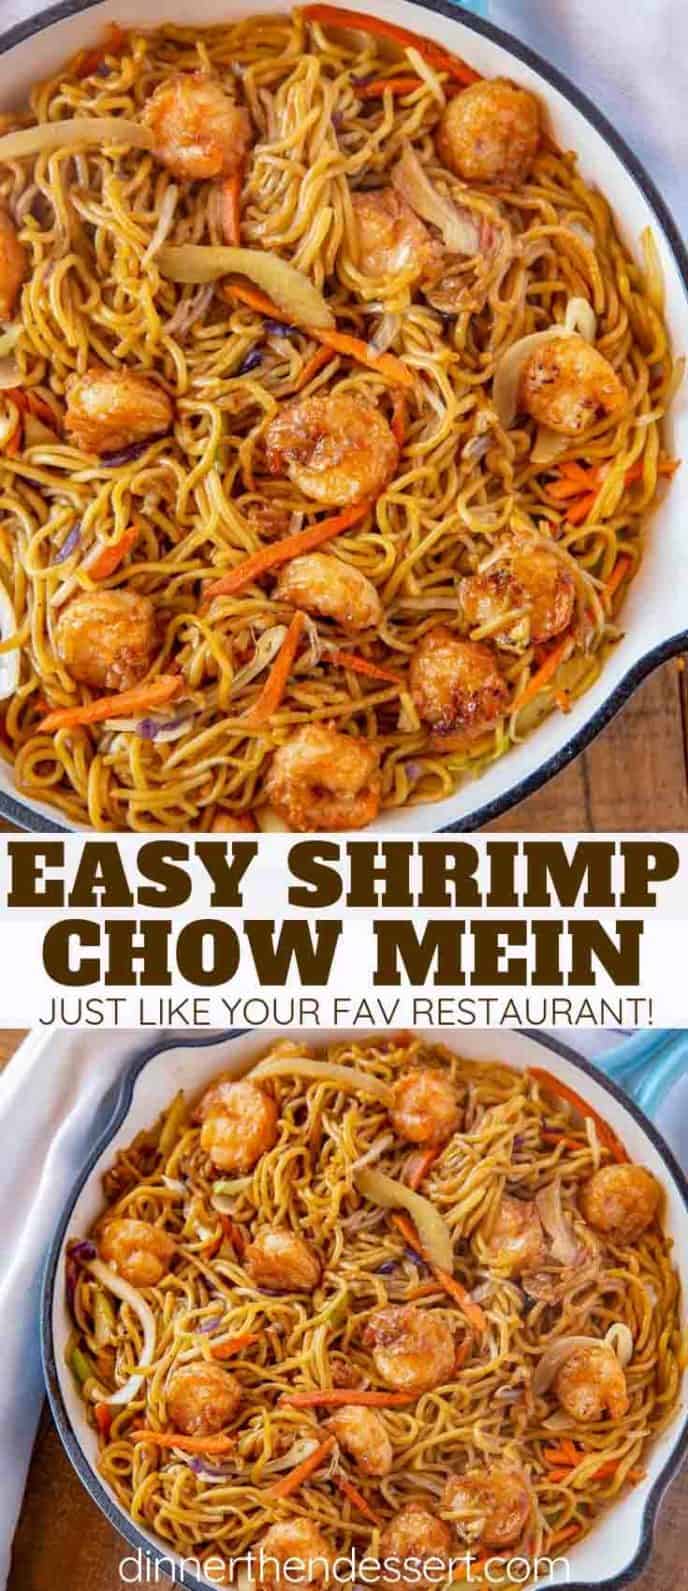 Chow Mein made with Shrimp